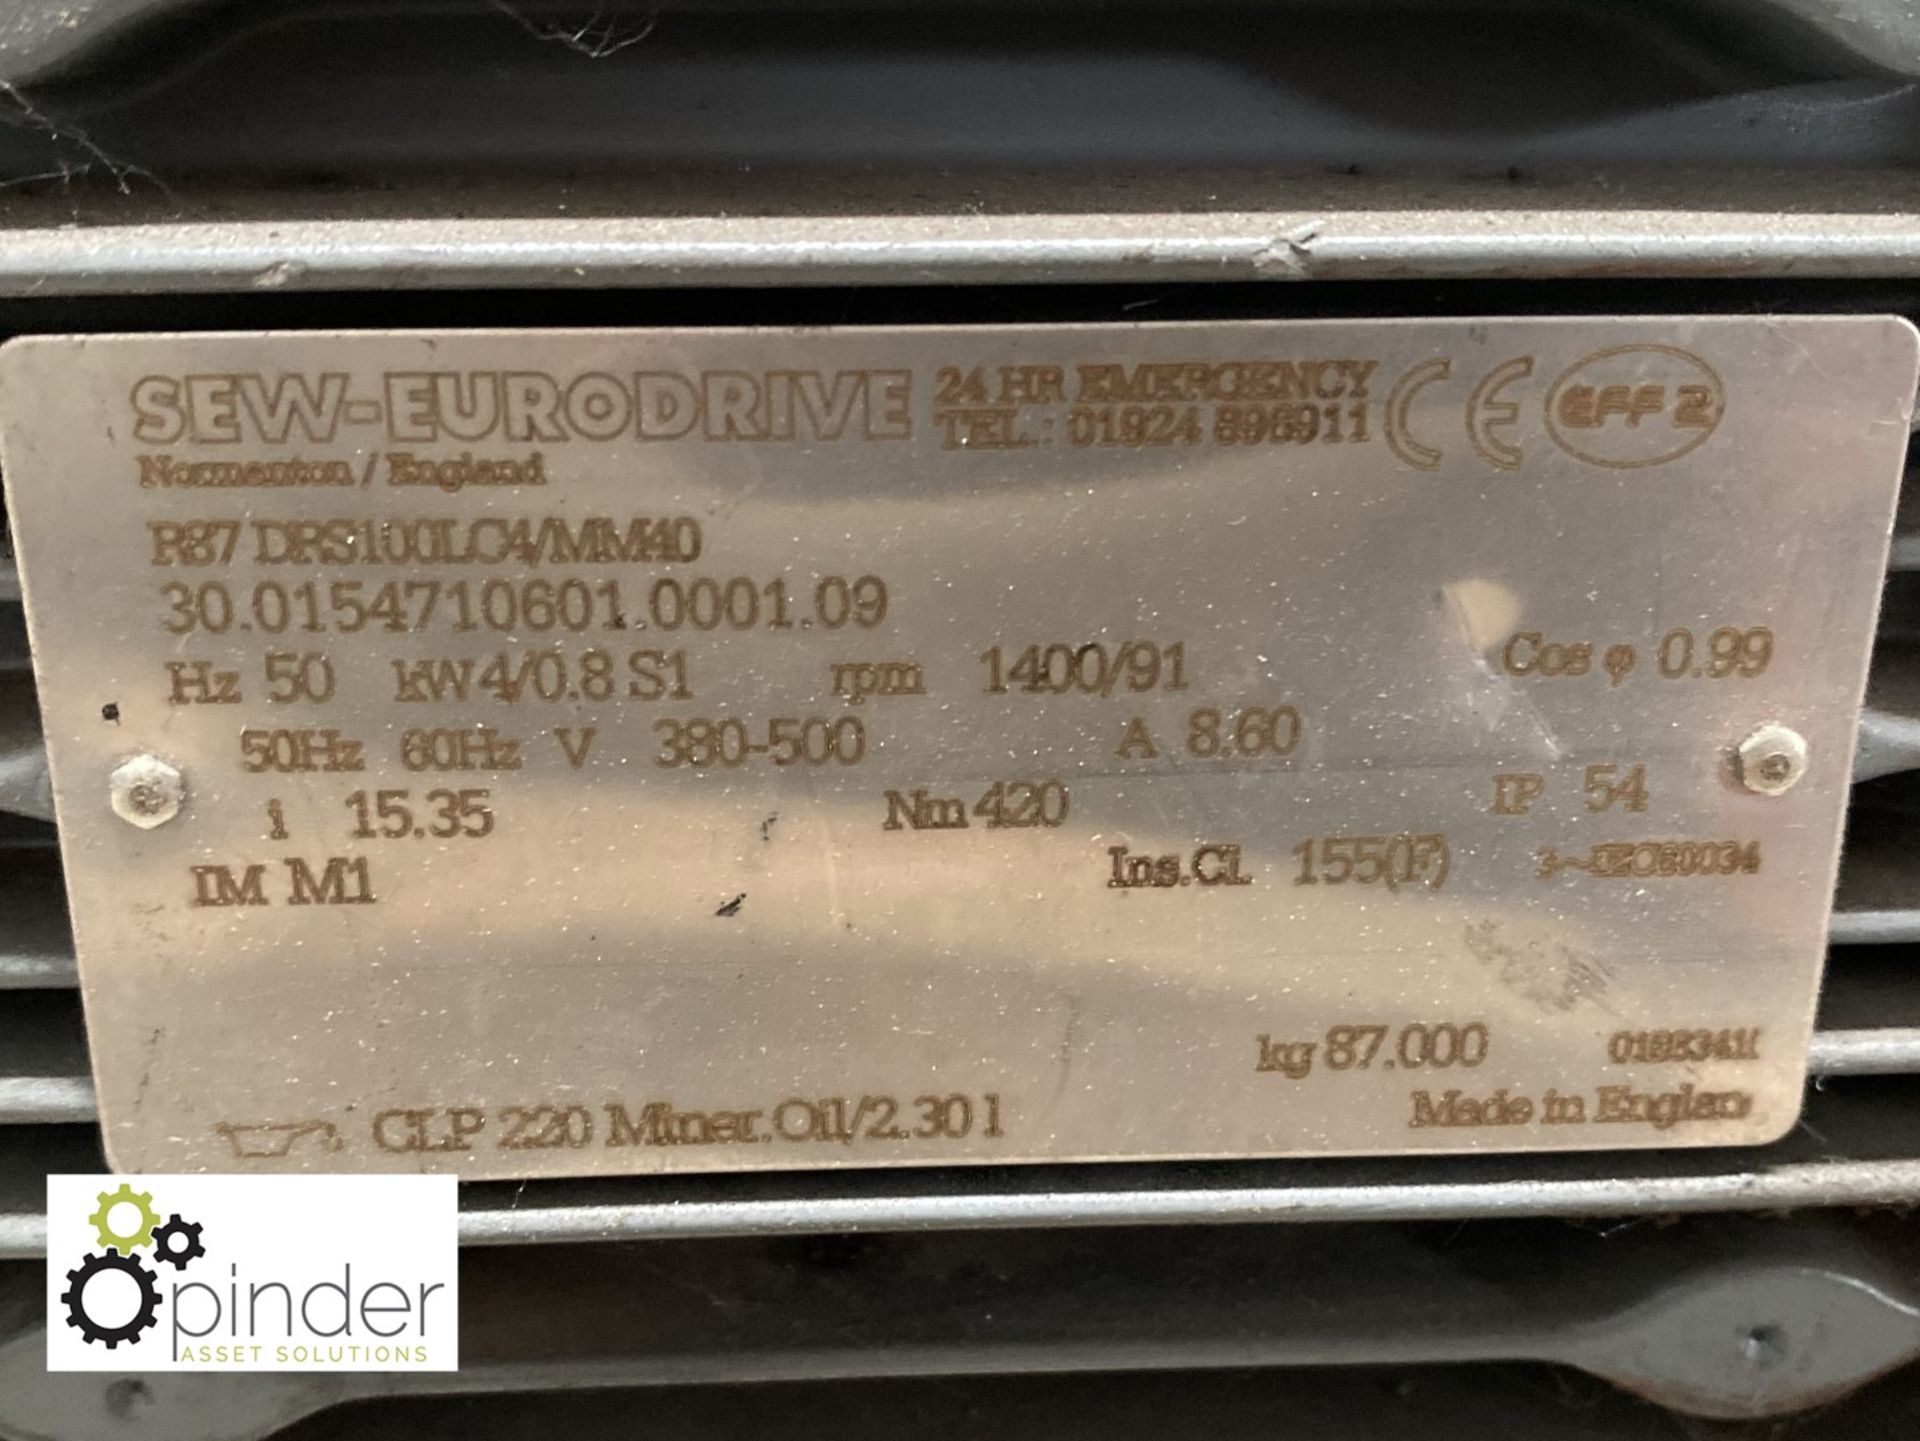 SEW Eurodrive DRS100 LC4/MM40 Geared Motor, 4kw, 91rpm - Image 3 of 3